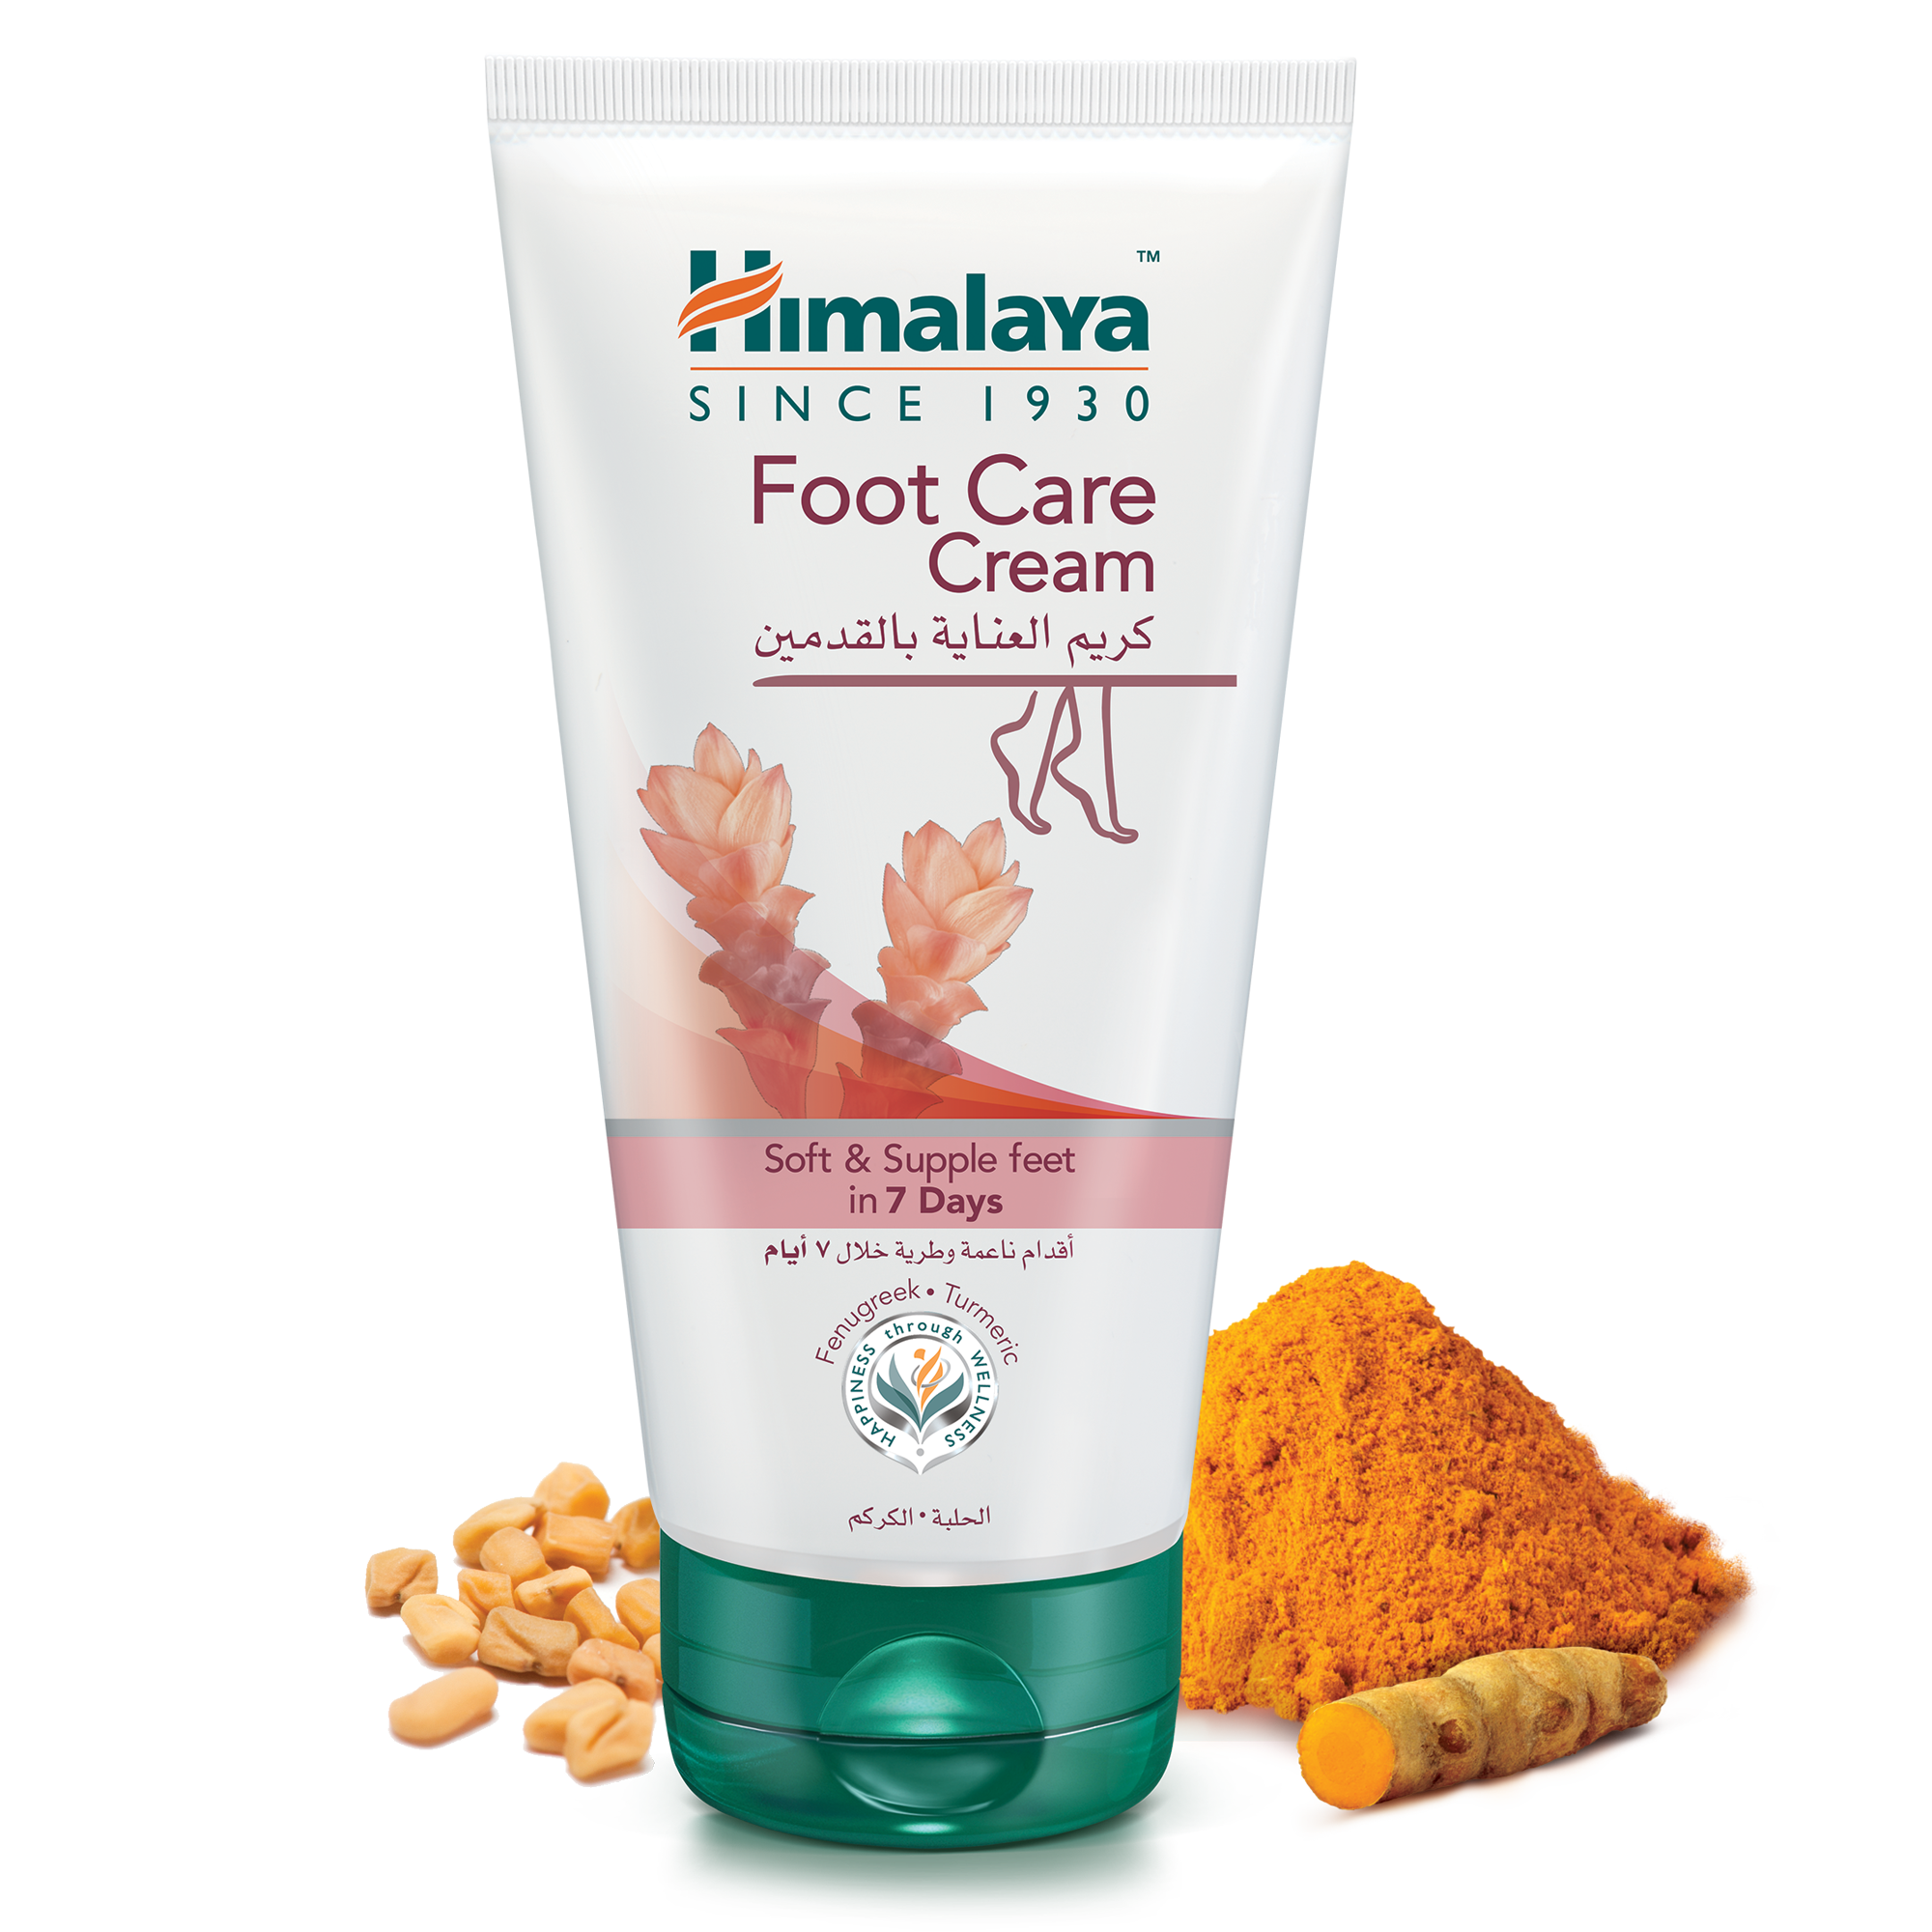 Himalaya Foot Care Cream 75g - For Dry, Cracked heels & Rough feet